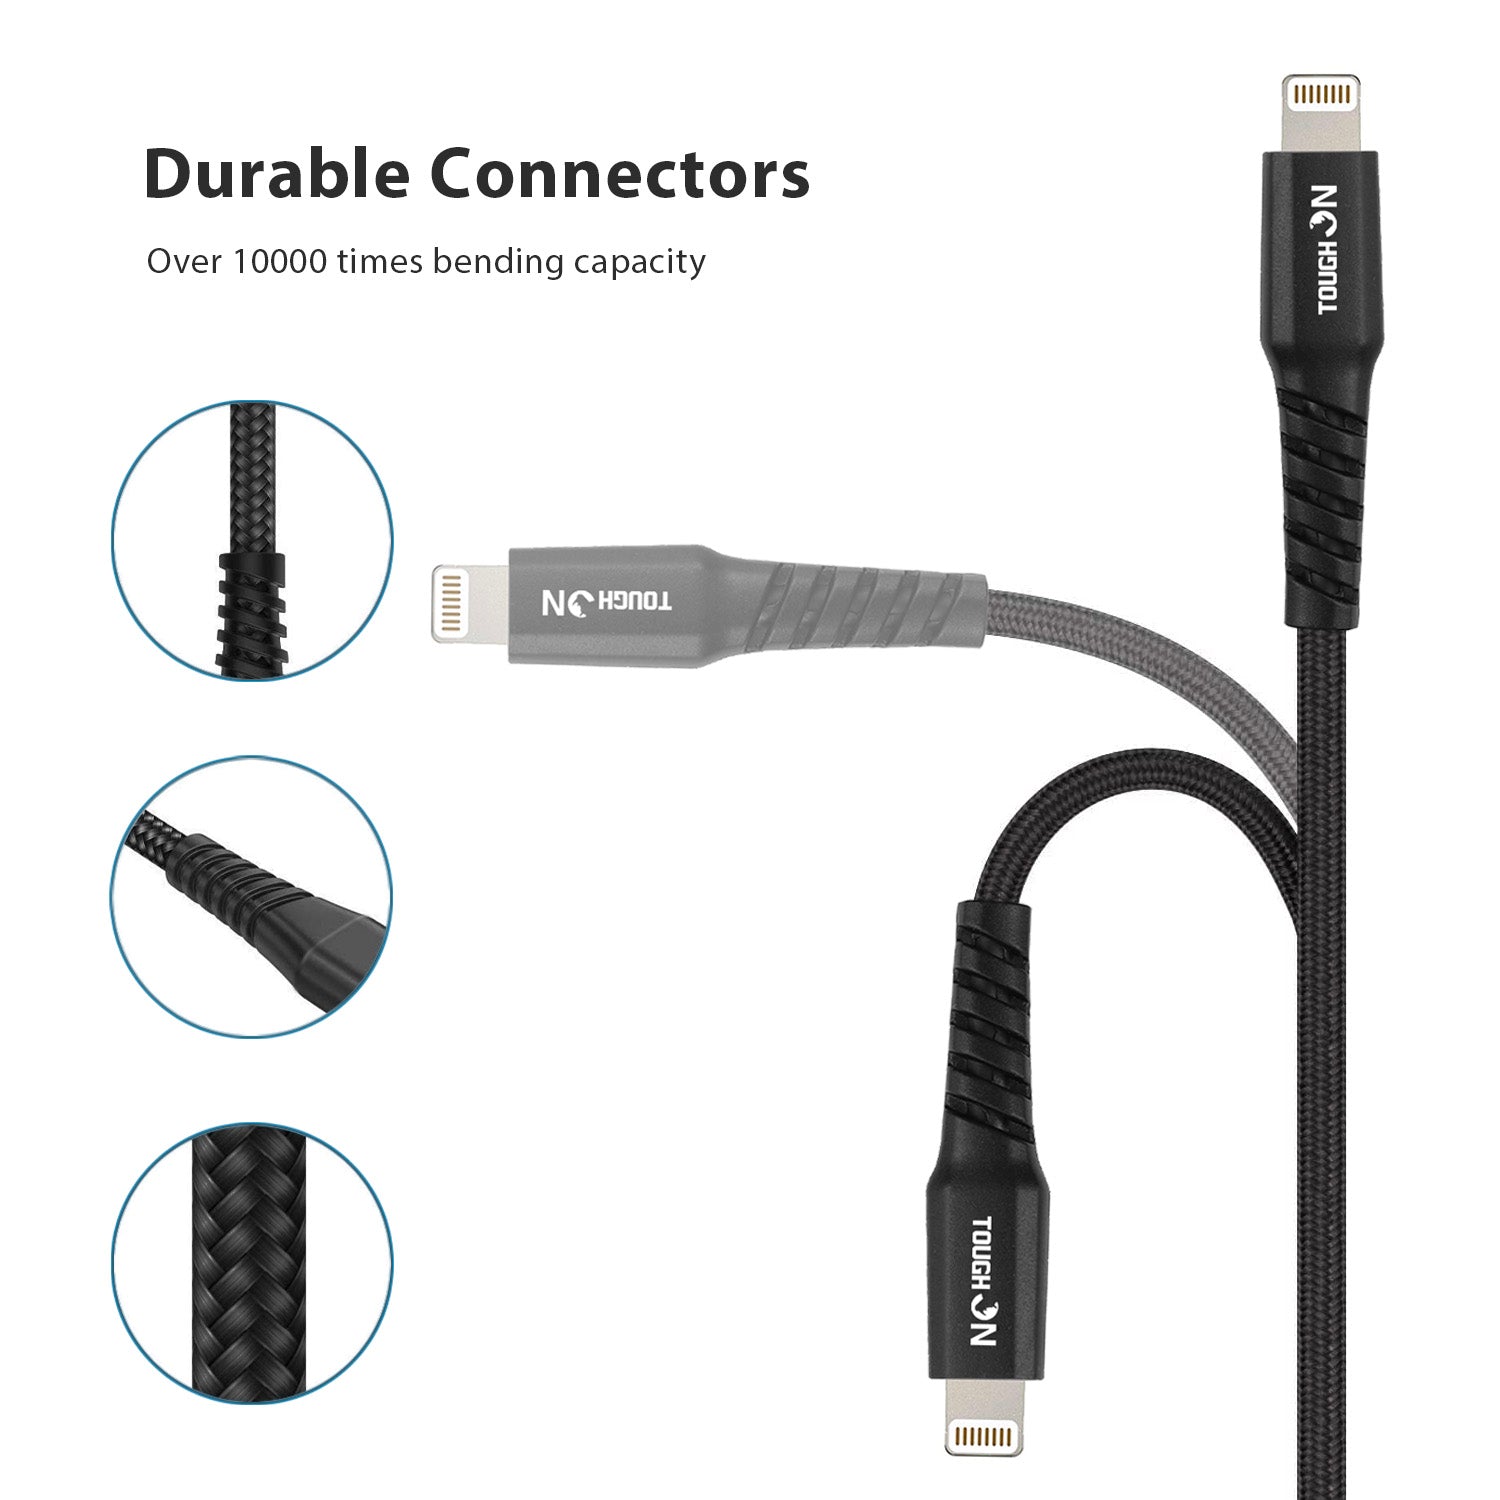 Tough on USB C to Lightning Cable 1m Black for iPhone & iPad Apple MFi Certified